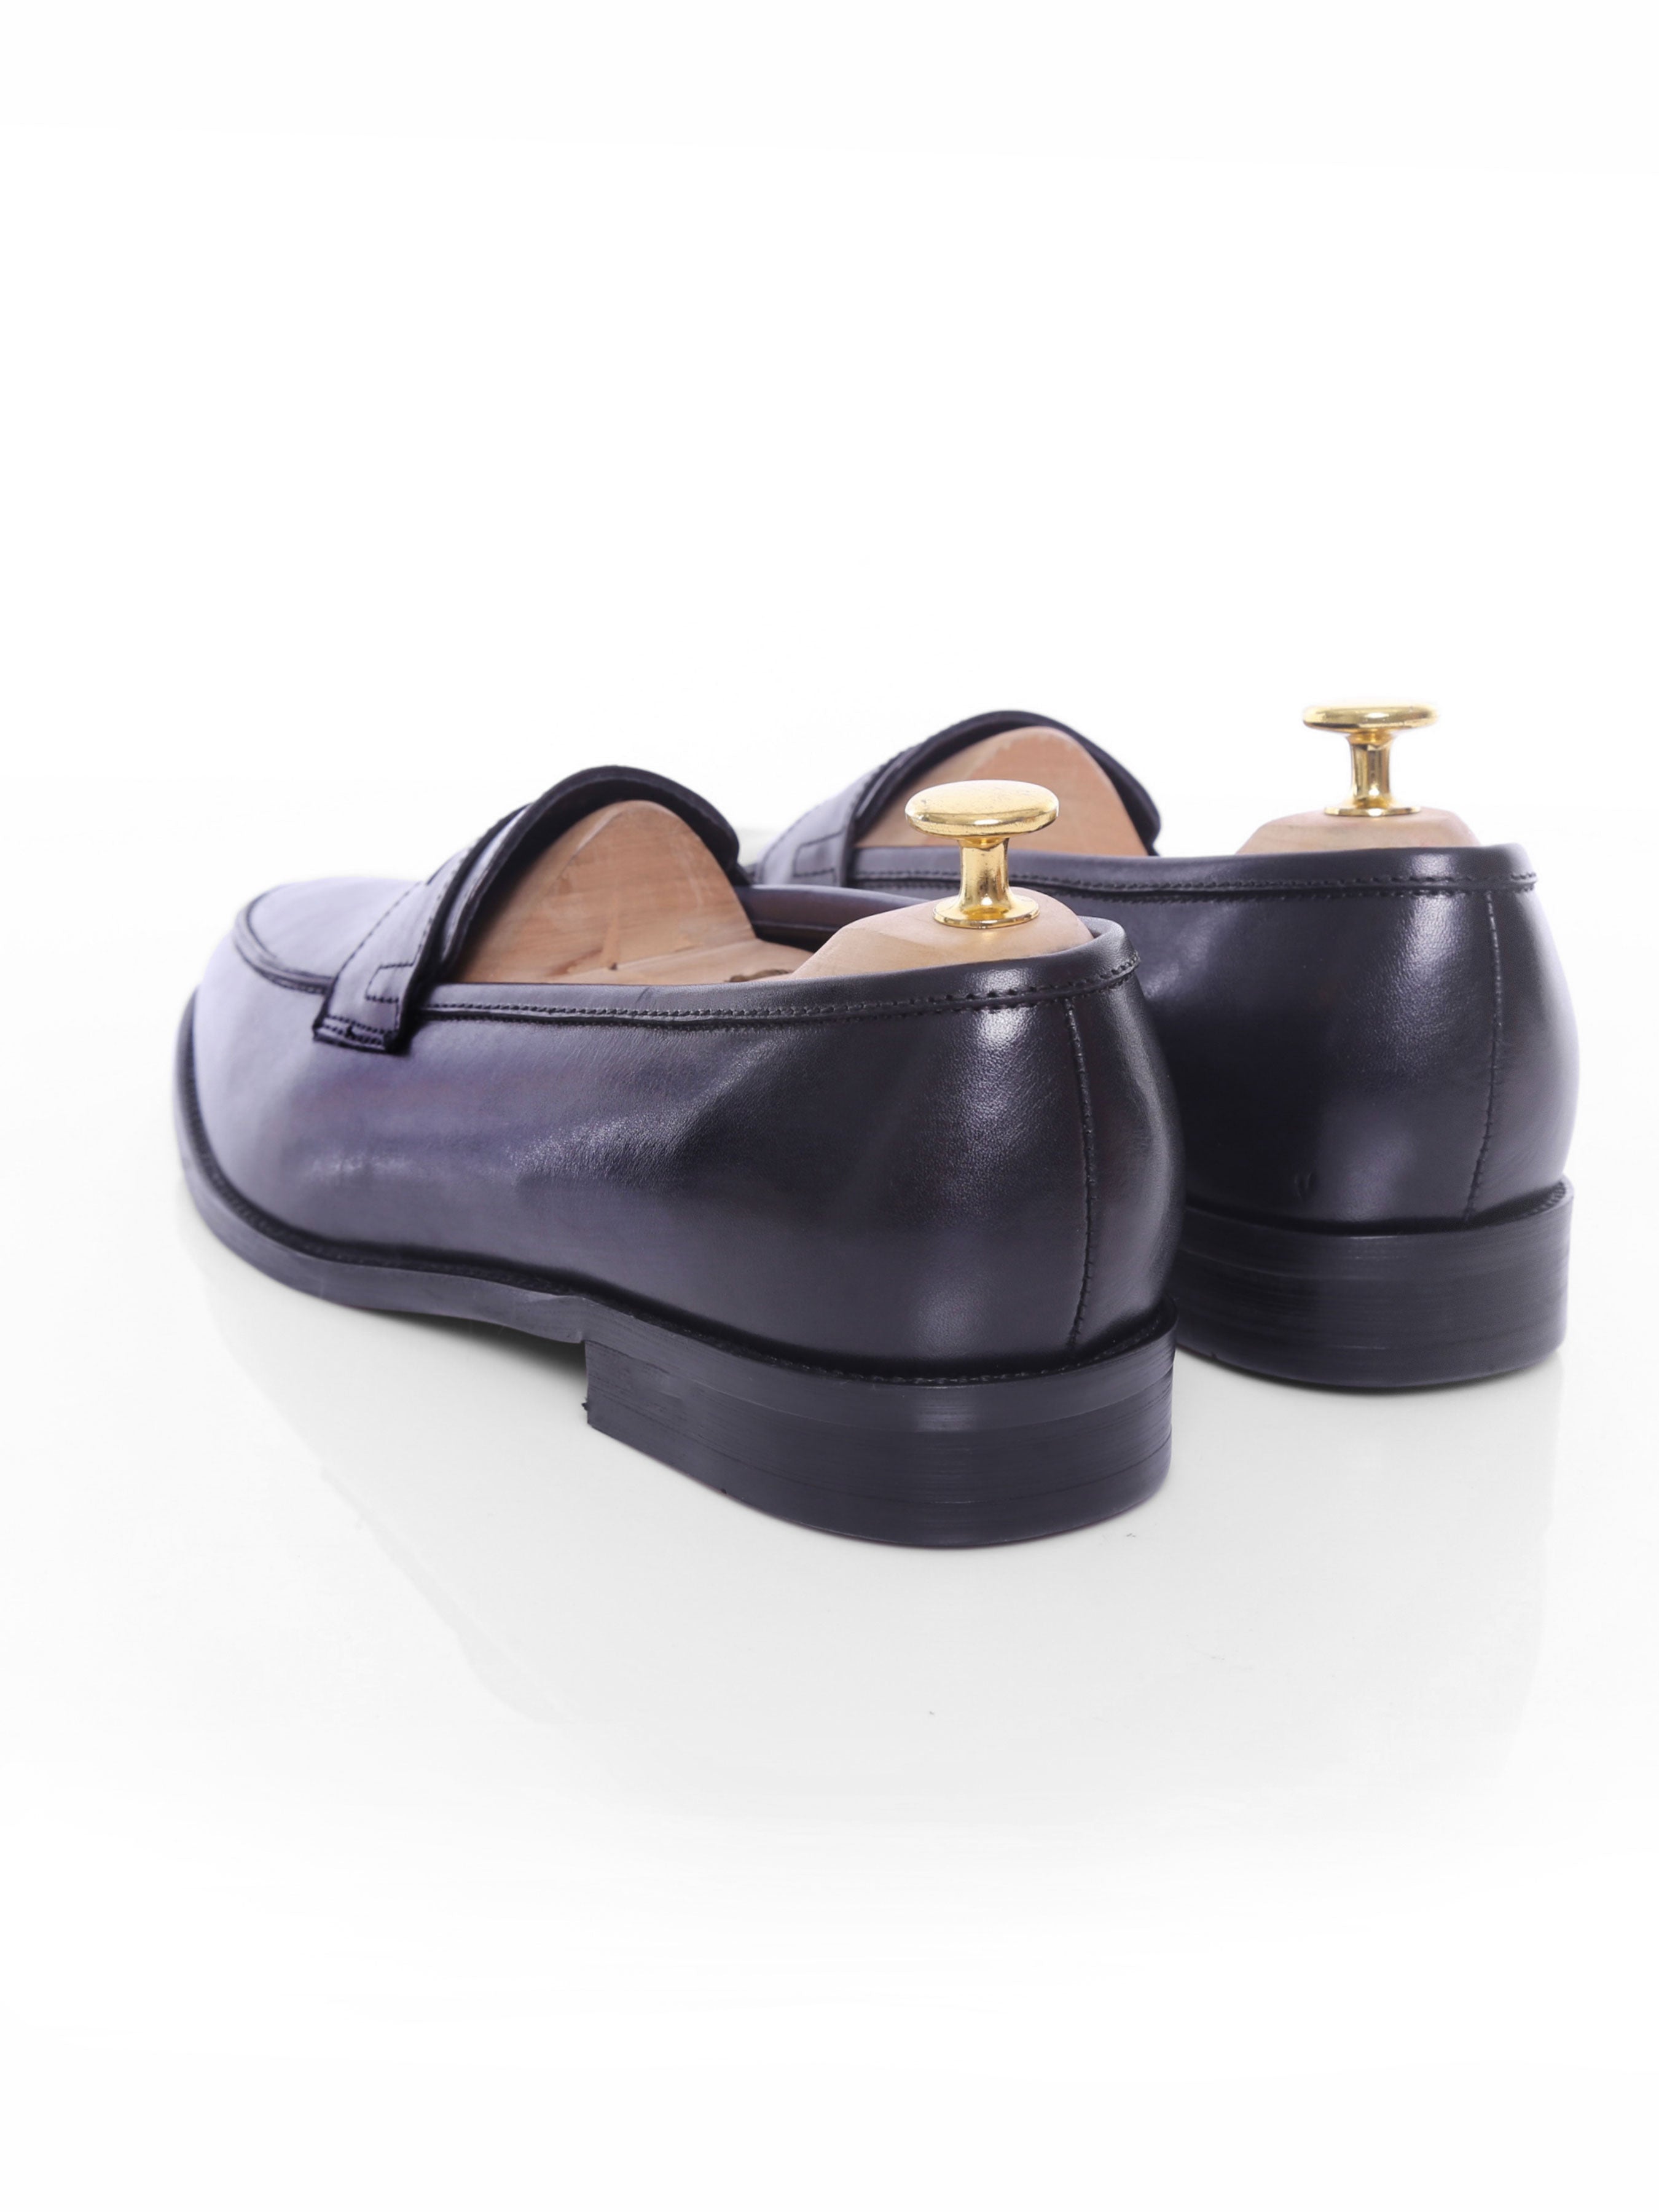 Penny Loafer - Black Grey (Hand Painted Patina) - Zeve Shoes